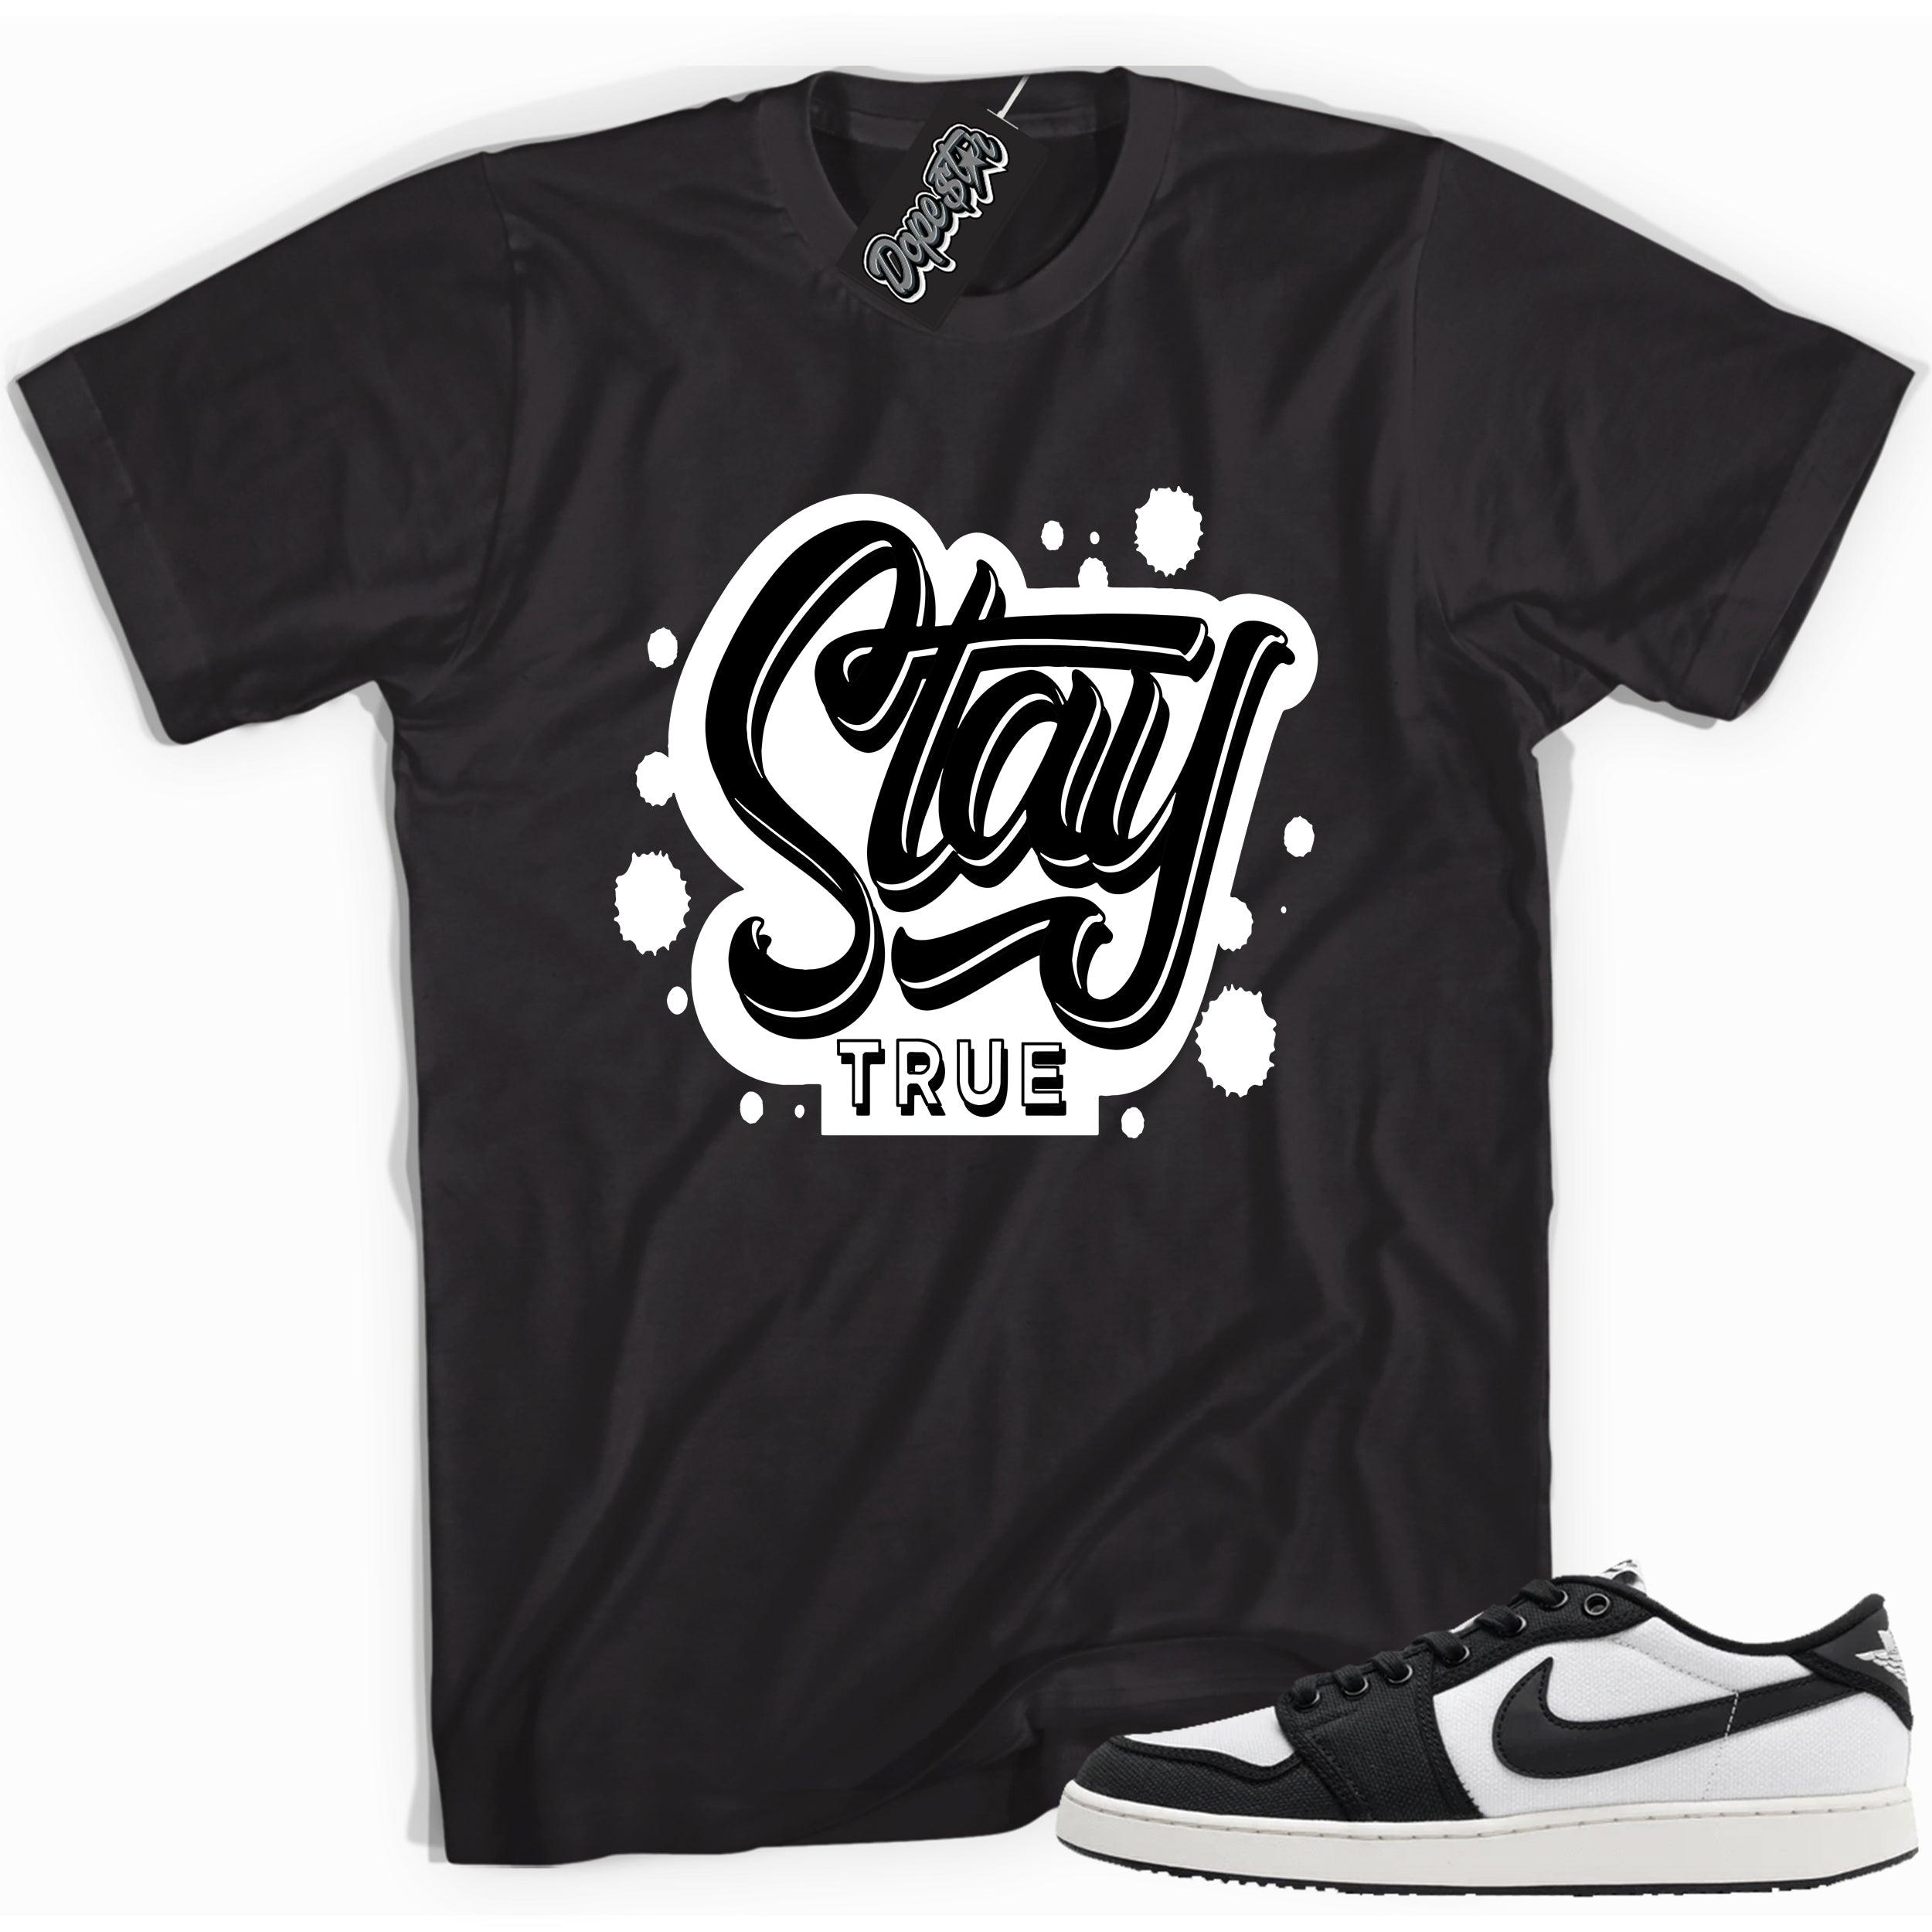 Cool black graphic tee with 'stay true' print, that perfectly matches Air Jordan 1 Retro Ajko Low Black & White sneakers.